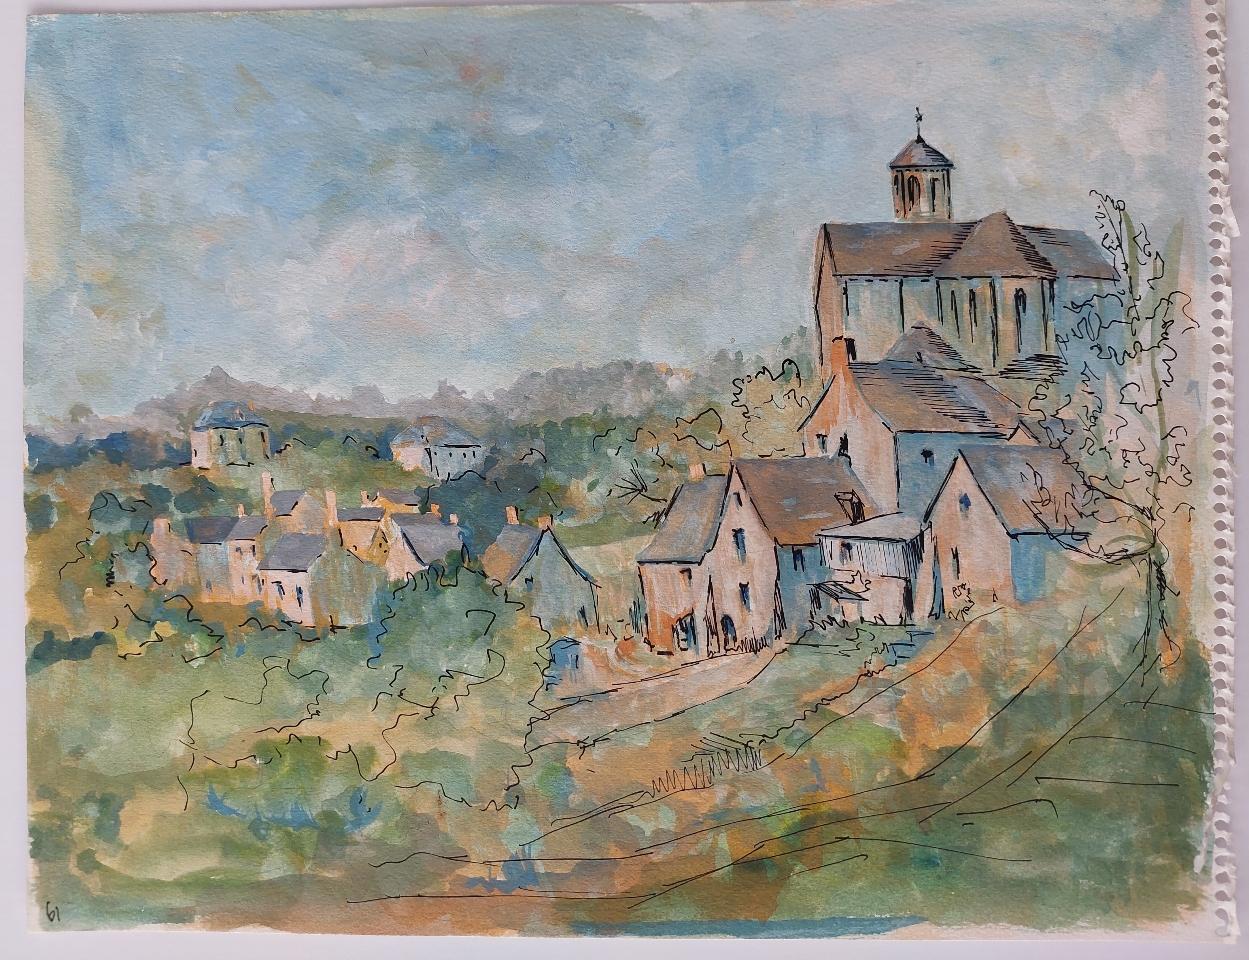 A French Village
by Bernard Labbe (French Mid-20th Century)
original watercolor, ink and gouache on paper
Size: 13.25 x 10.5 inches
unsigned, stamped verso
Condition: Very good and ready to be enjoyed.

Provenance: the artists atelier/